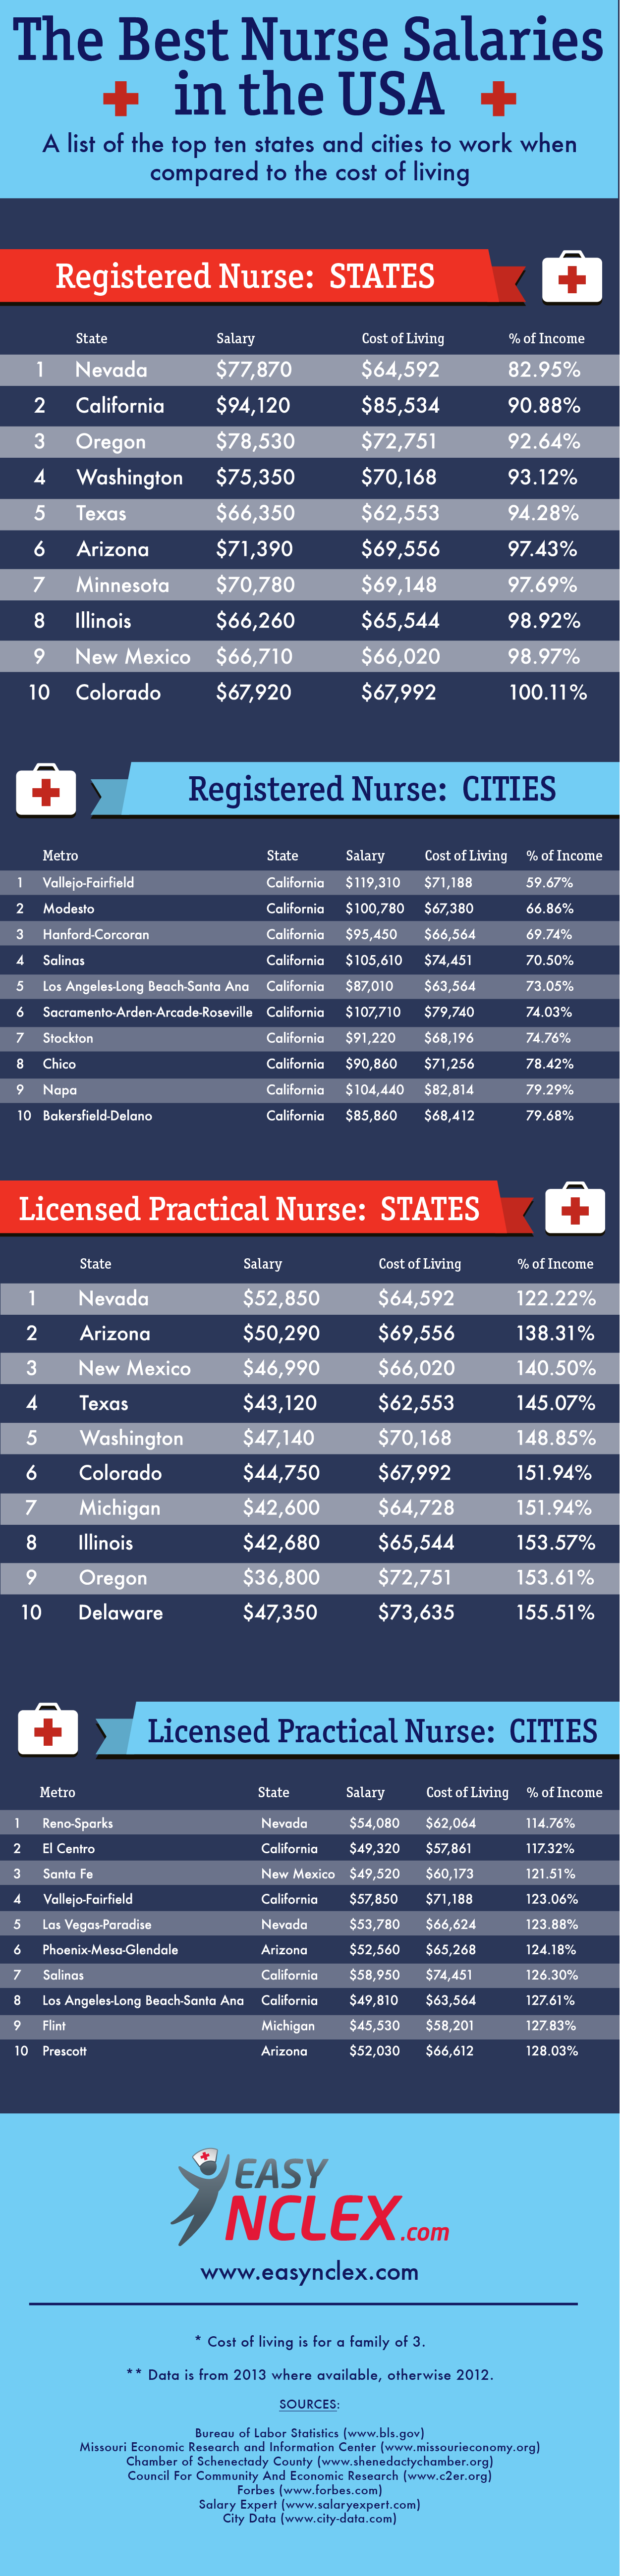 The best nurse salaries in the USA